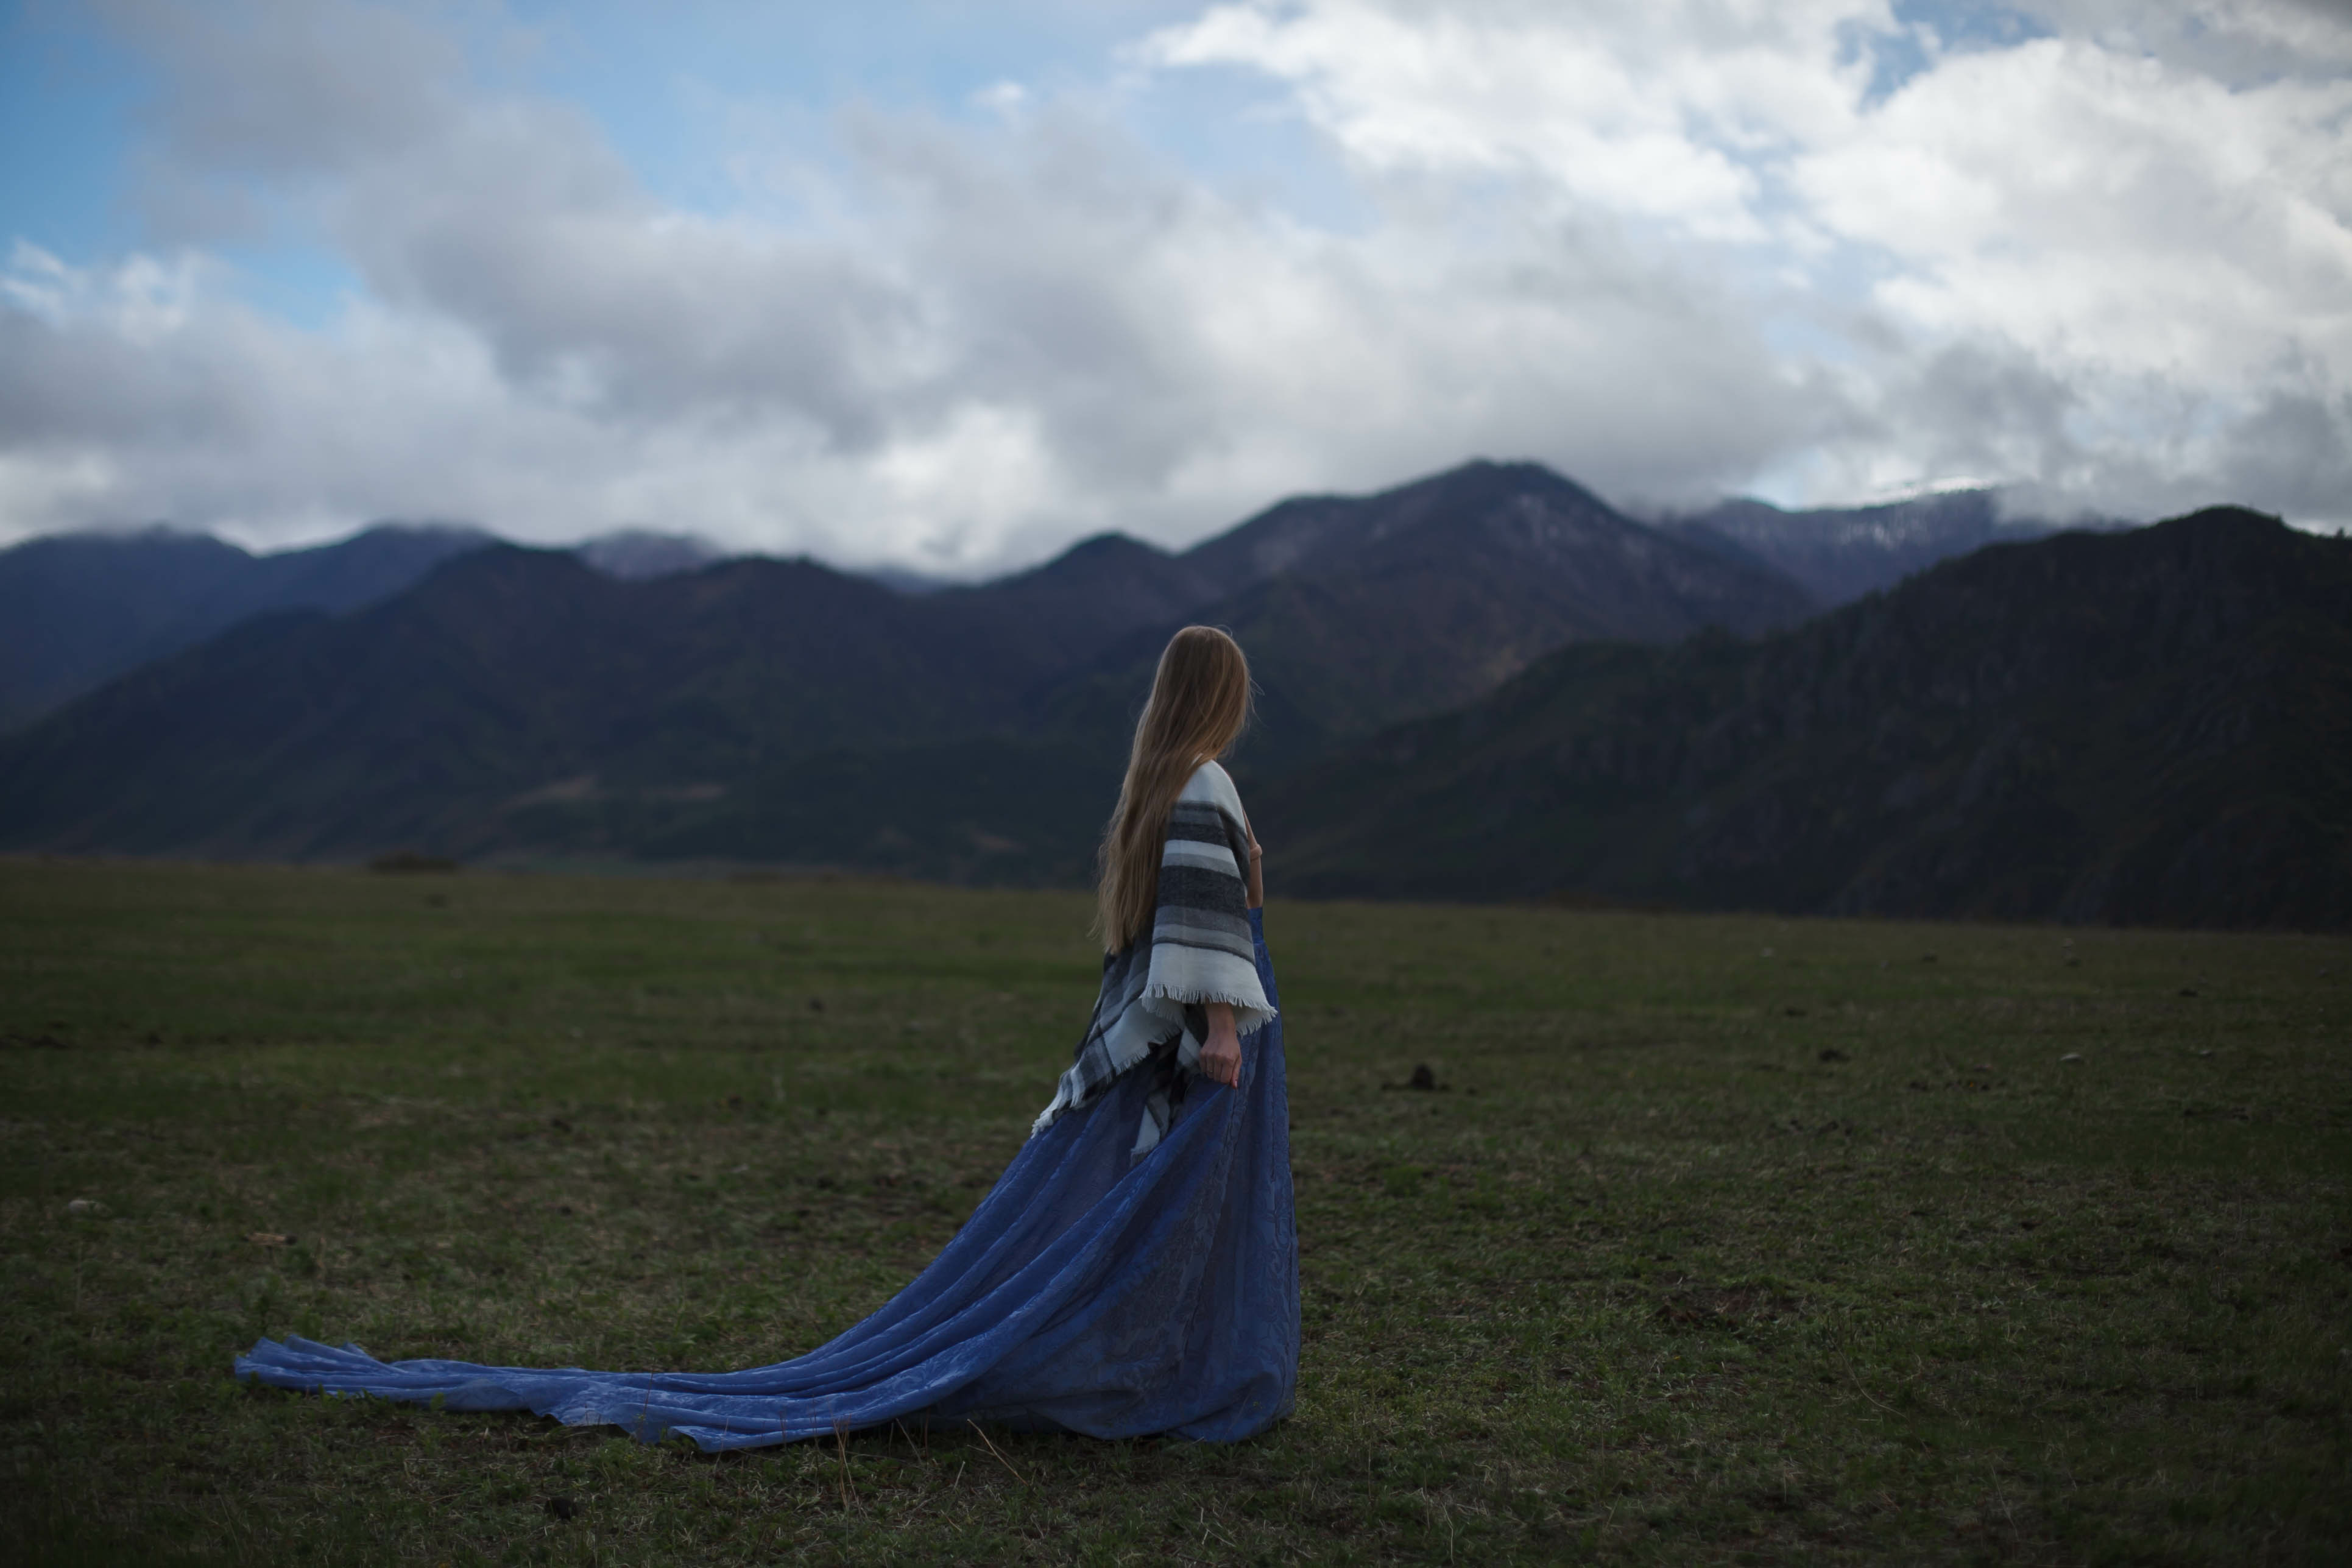 a girl walks in a field on a background of snow-capped mountains